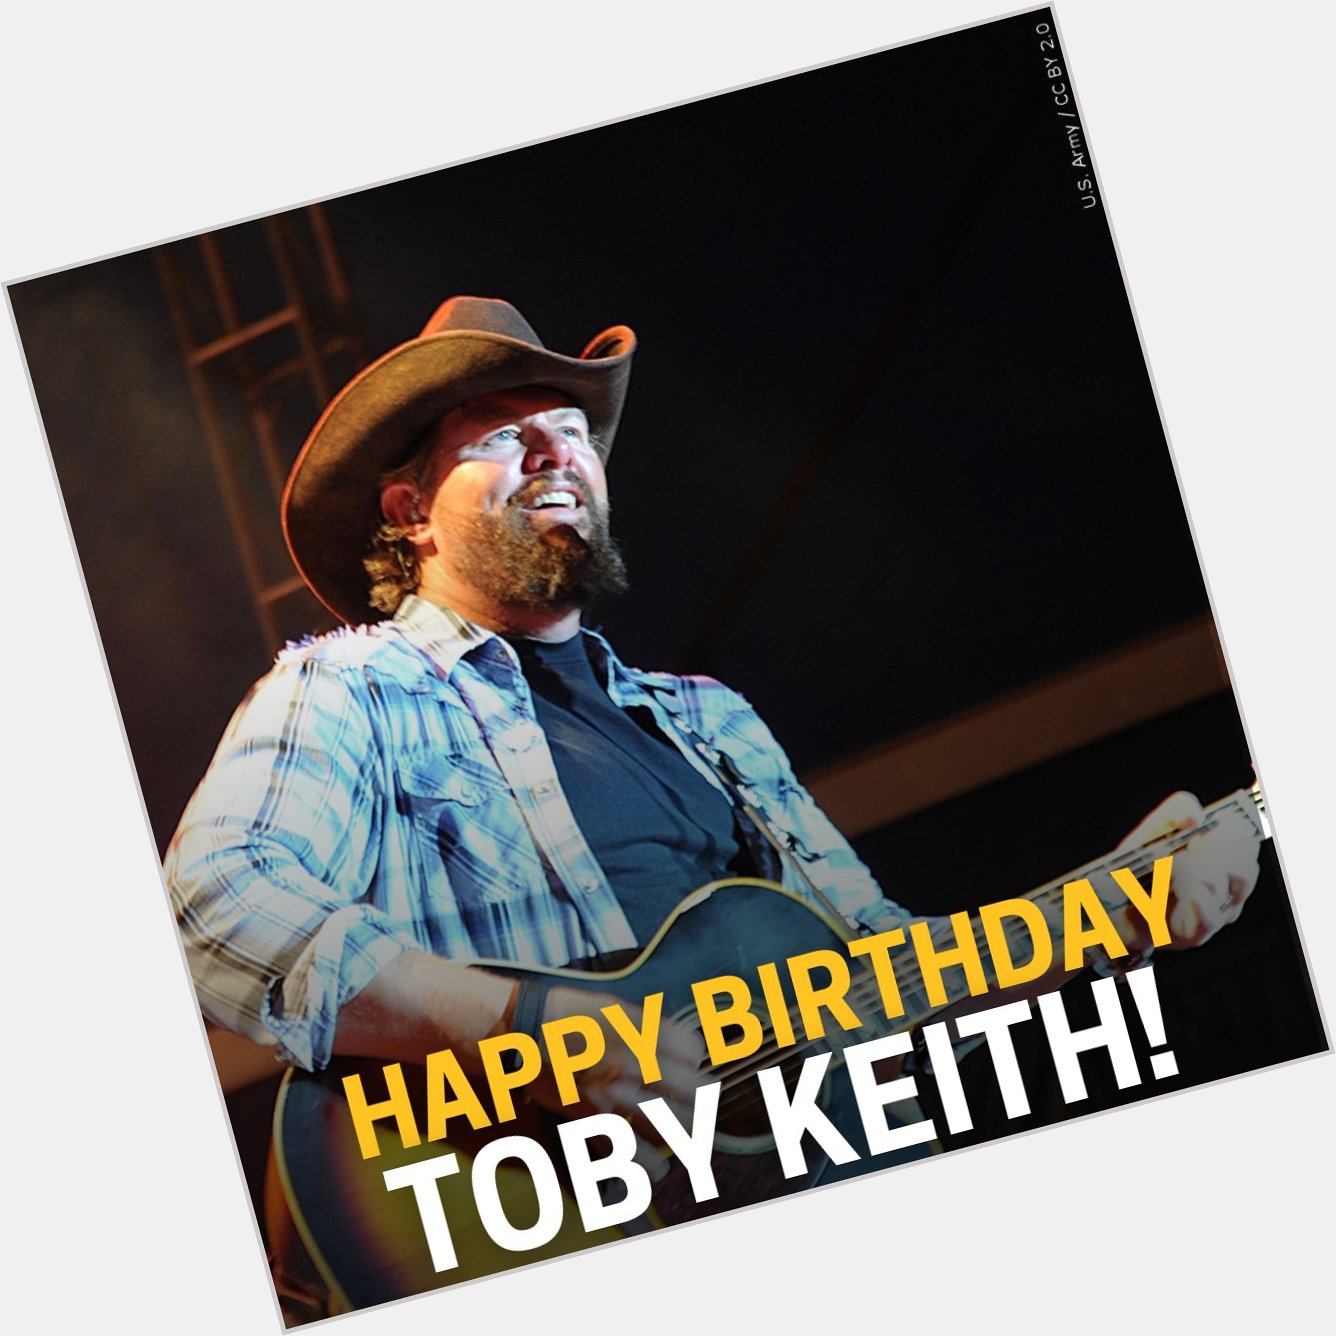 HAPPY BIRTHDAY, TOBY! Tell us your favorite Toby Keith song to celebrate! 